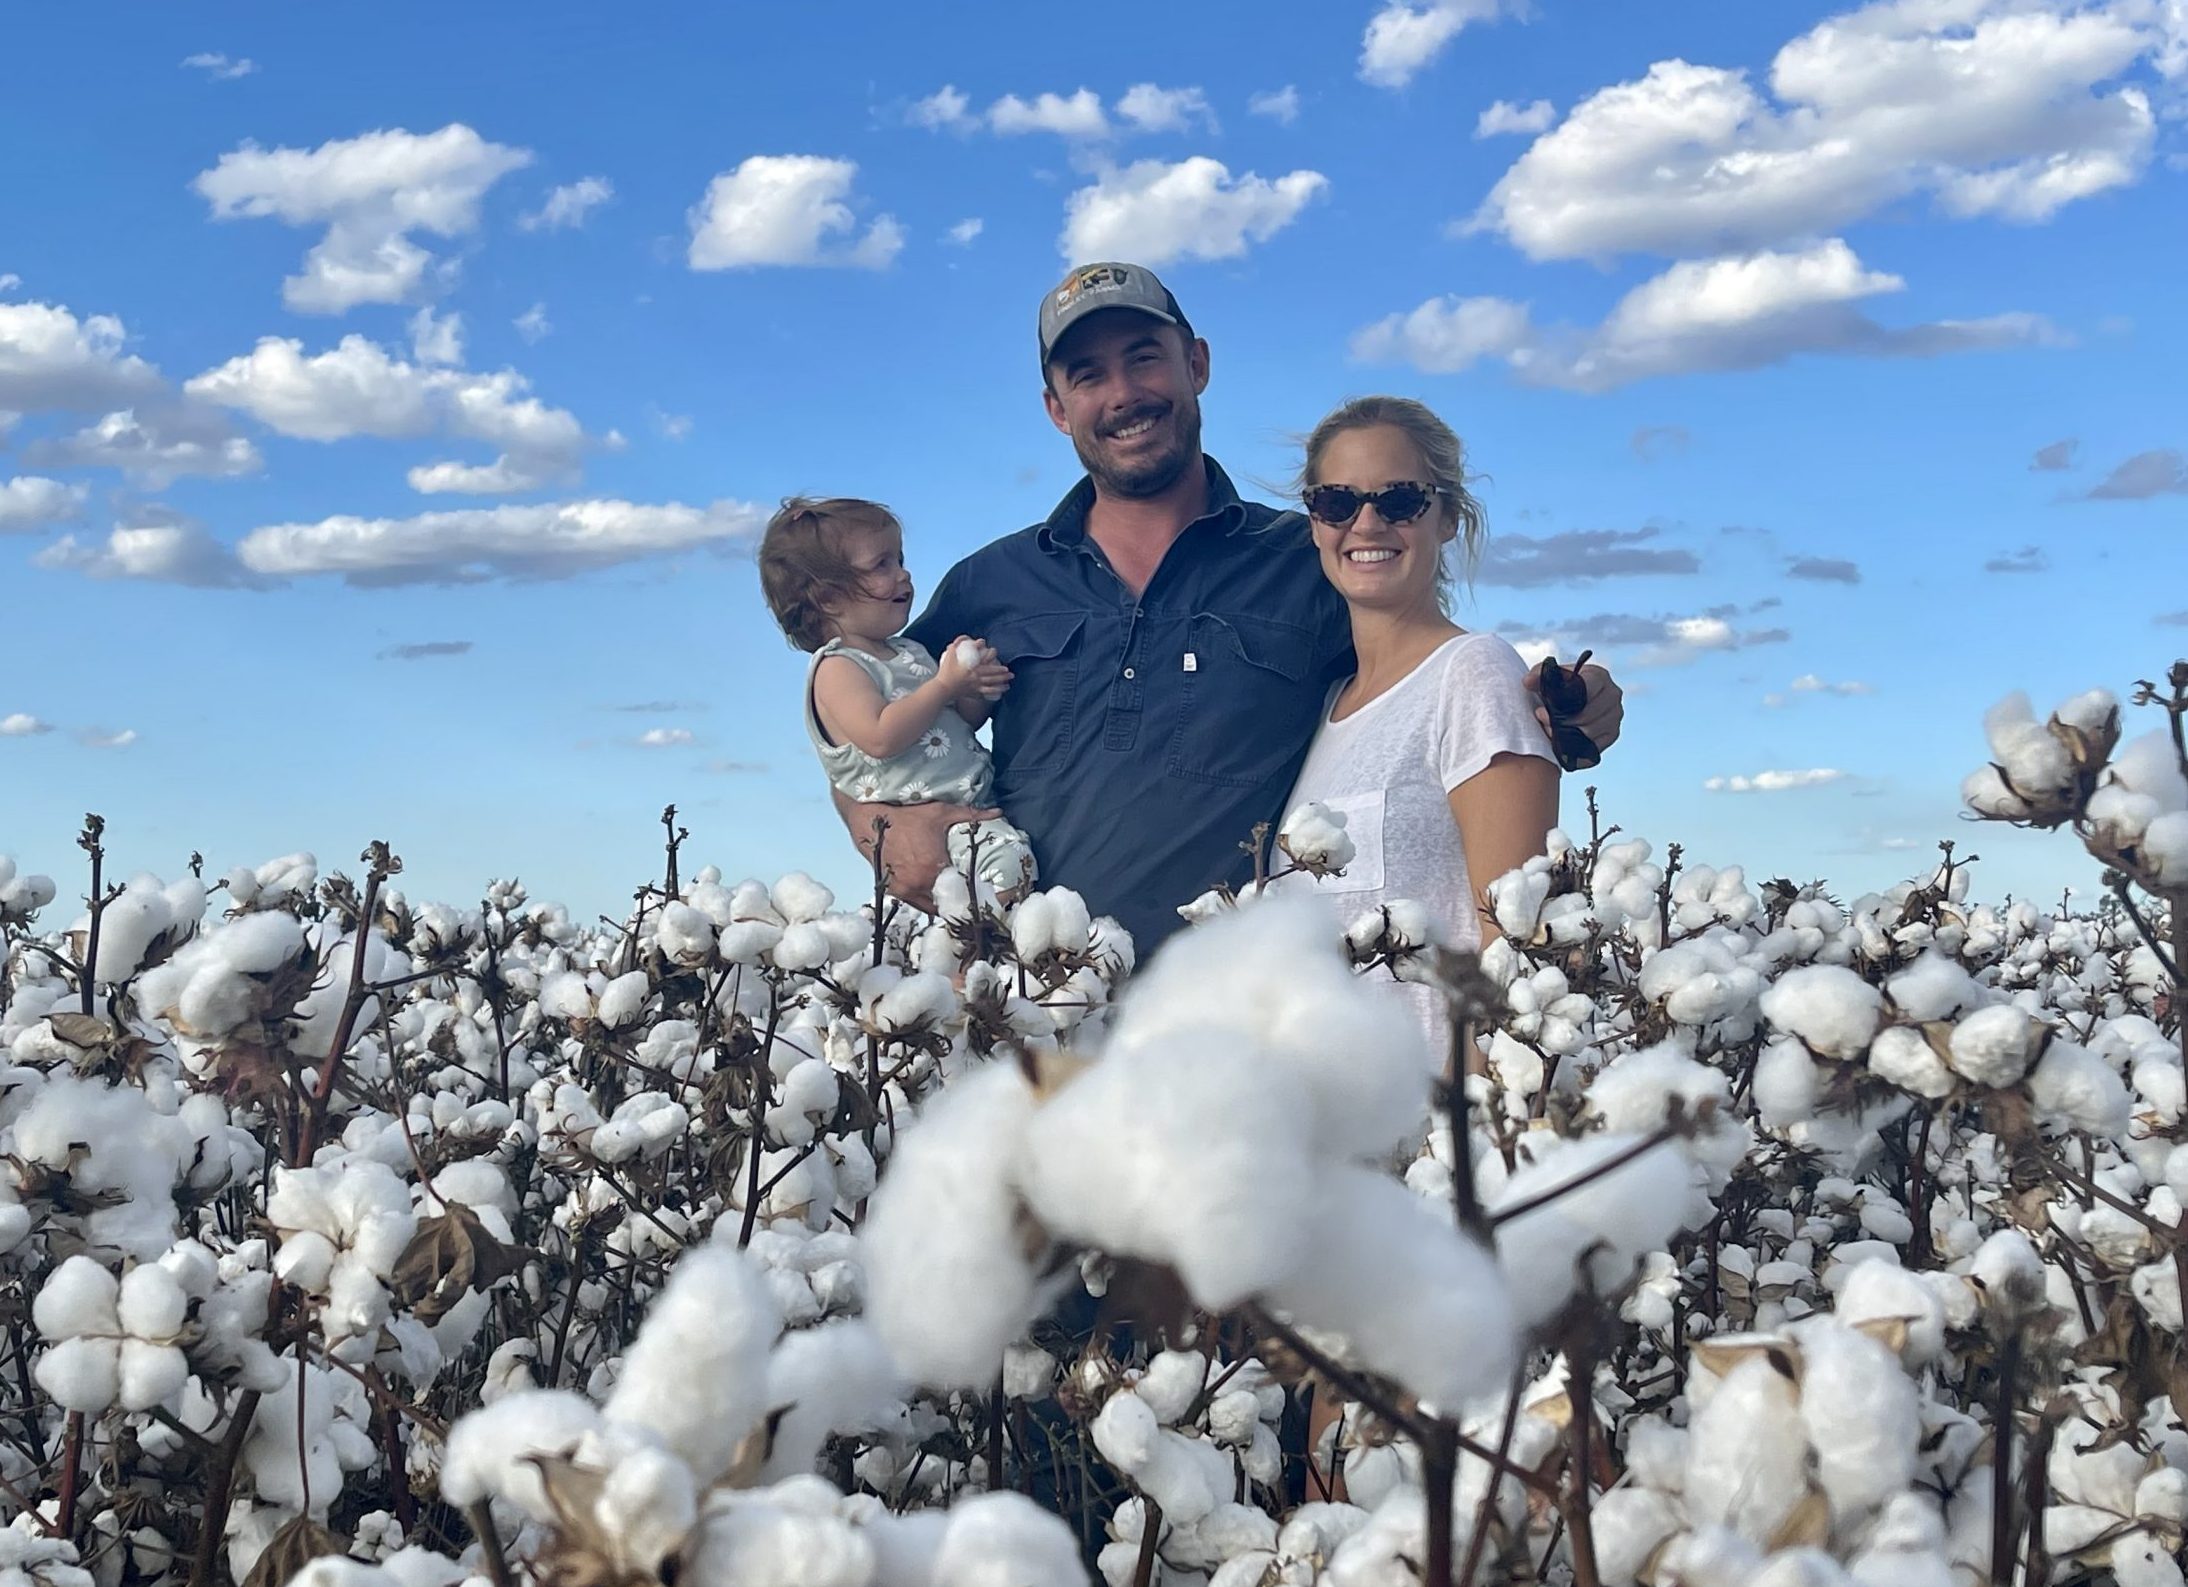 It’s that time of year again – it’s cotton picking time